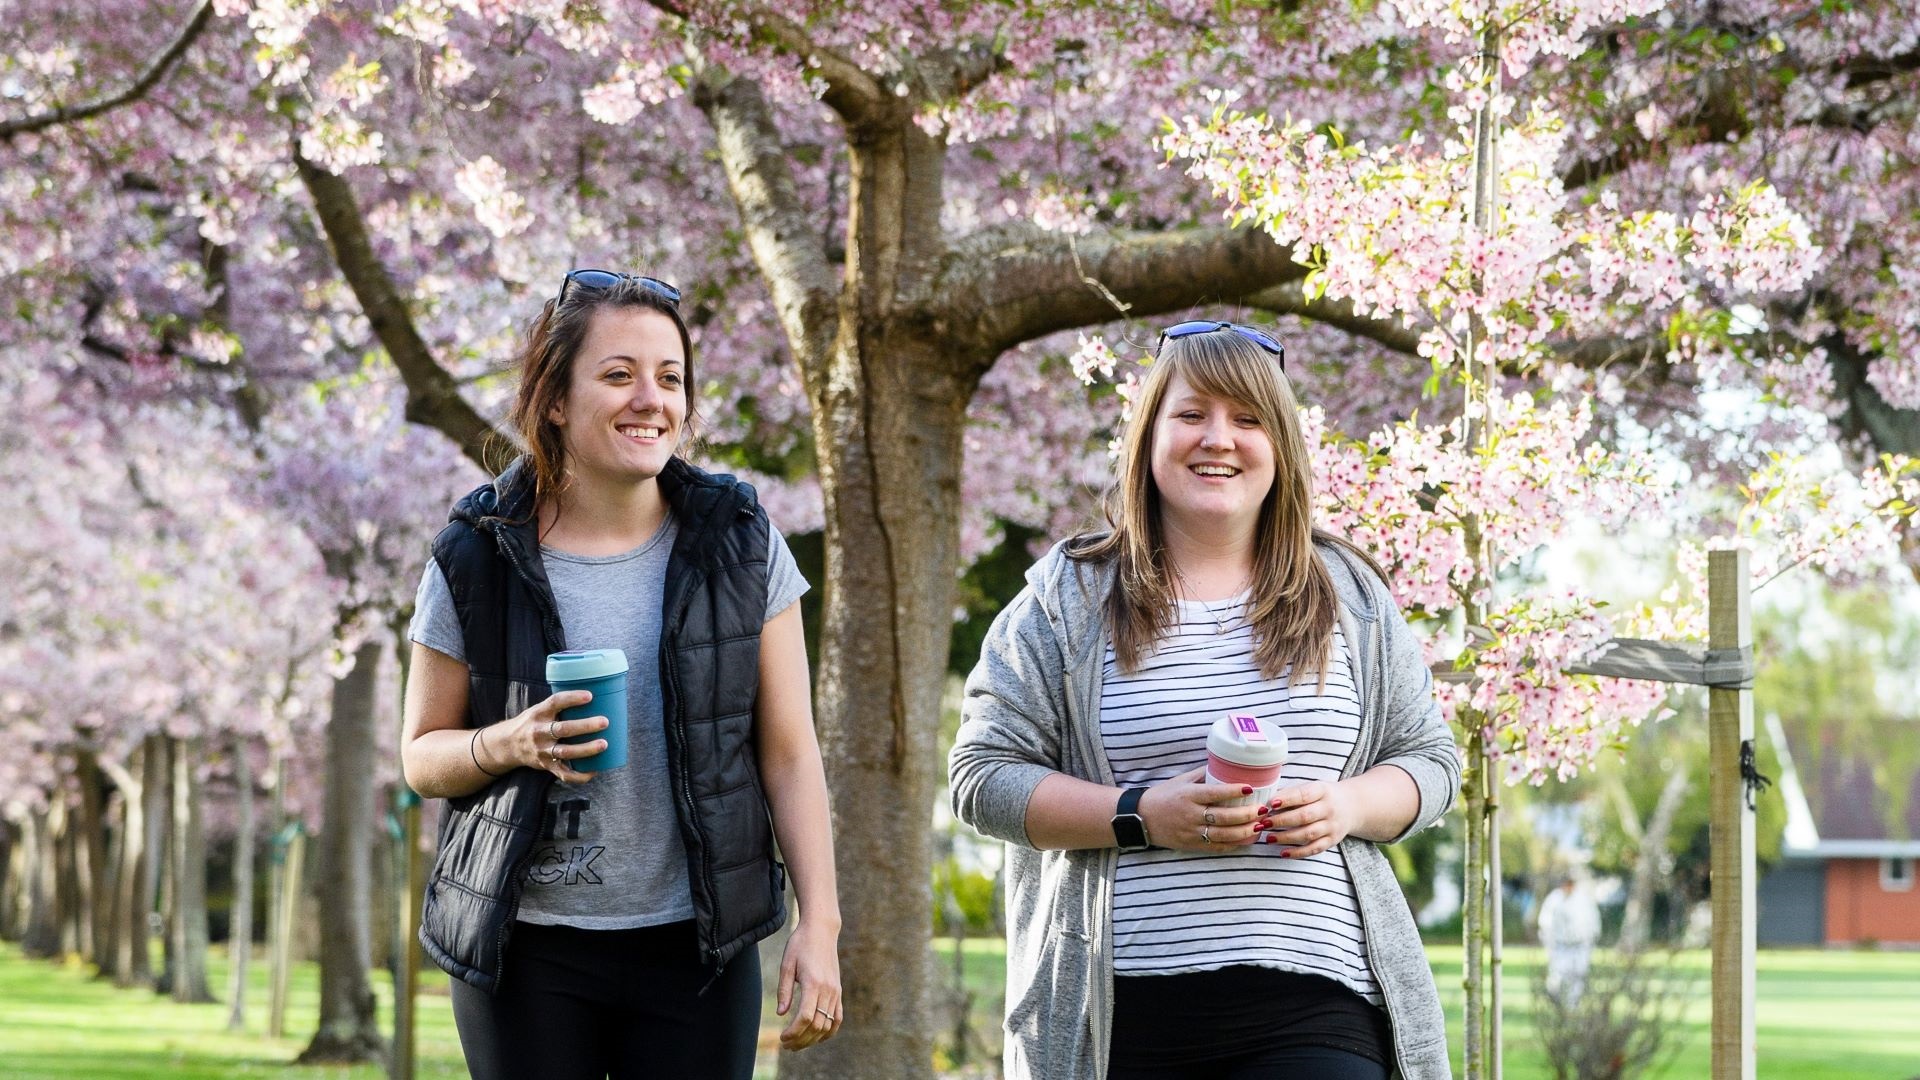 Photo shows two young women drinking coffee and walking among cherry trees in full blossom.